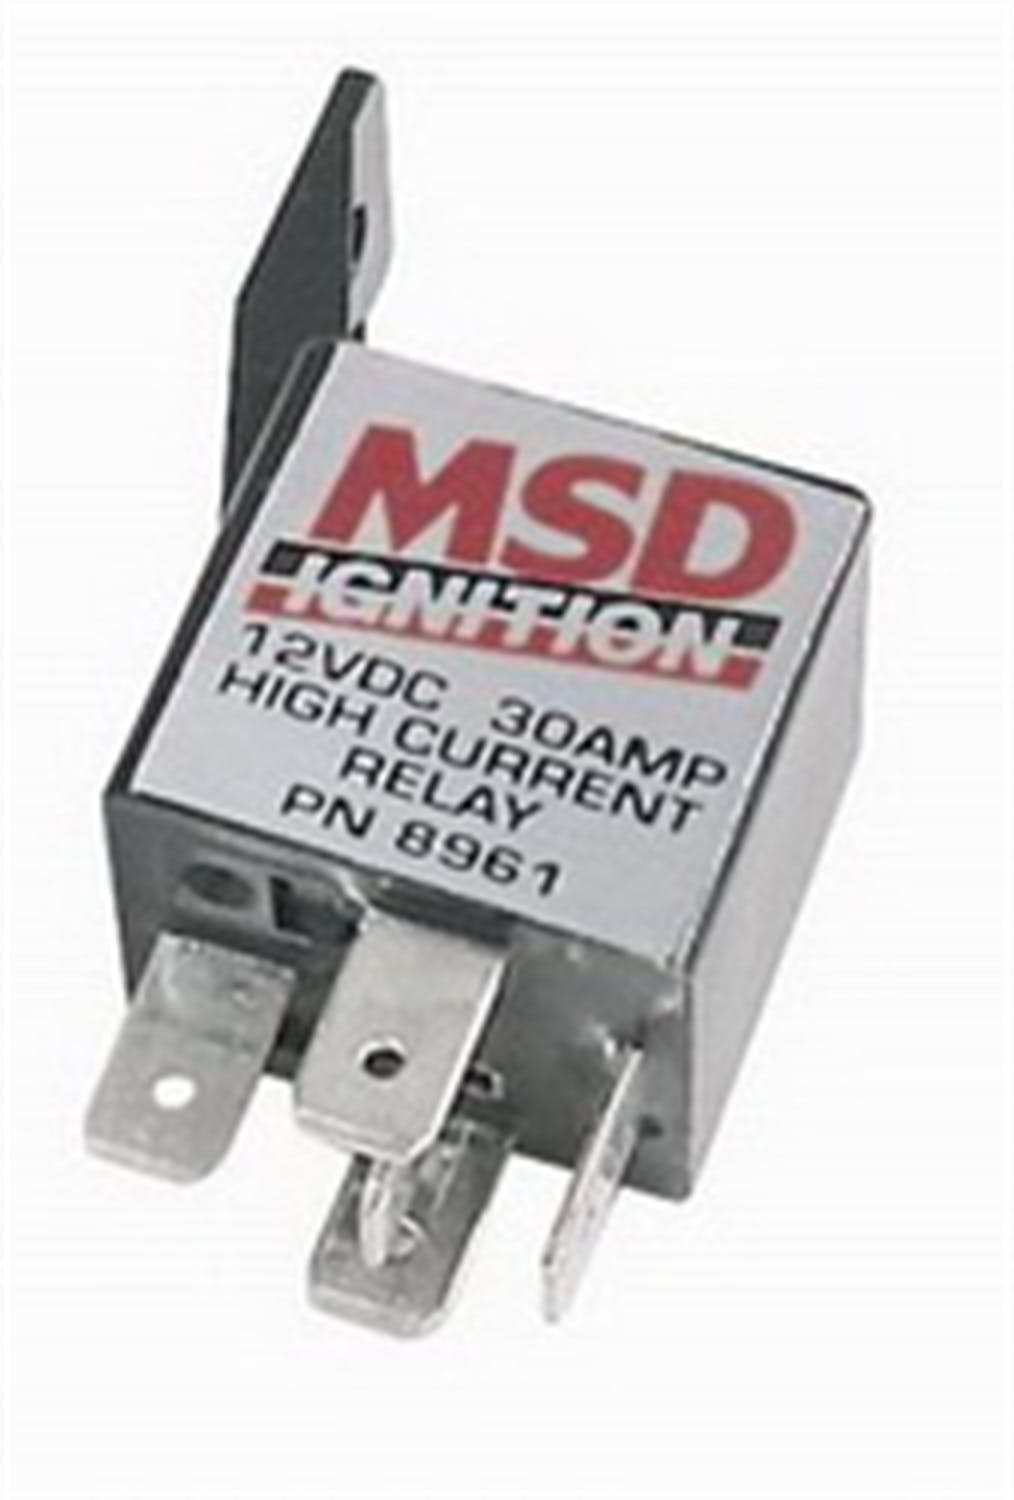 MSD Performance 8961 MSD High Current Relay, SPST